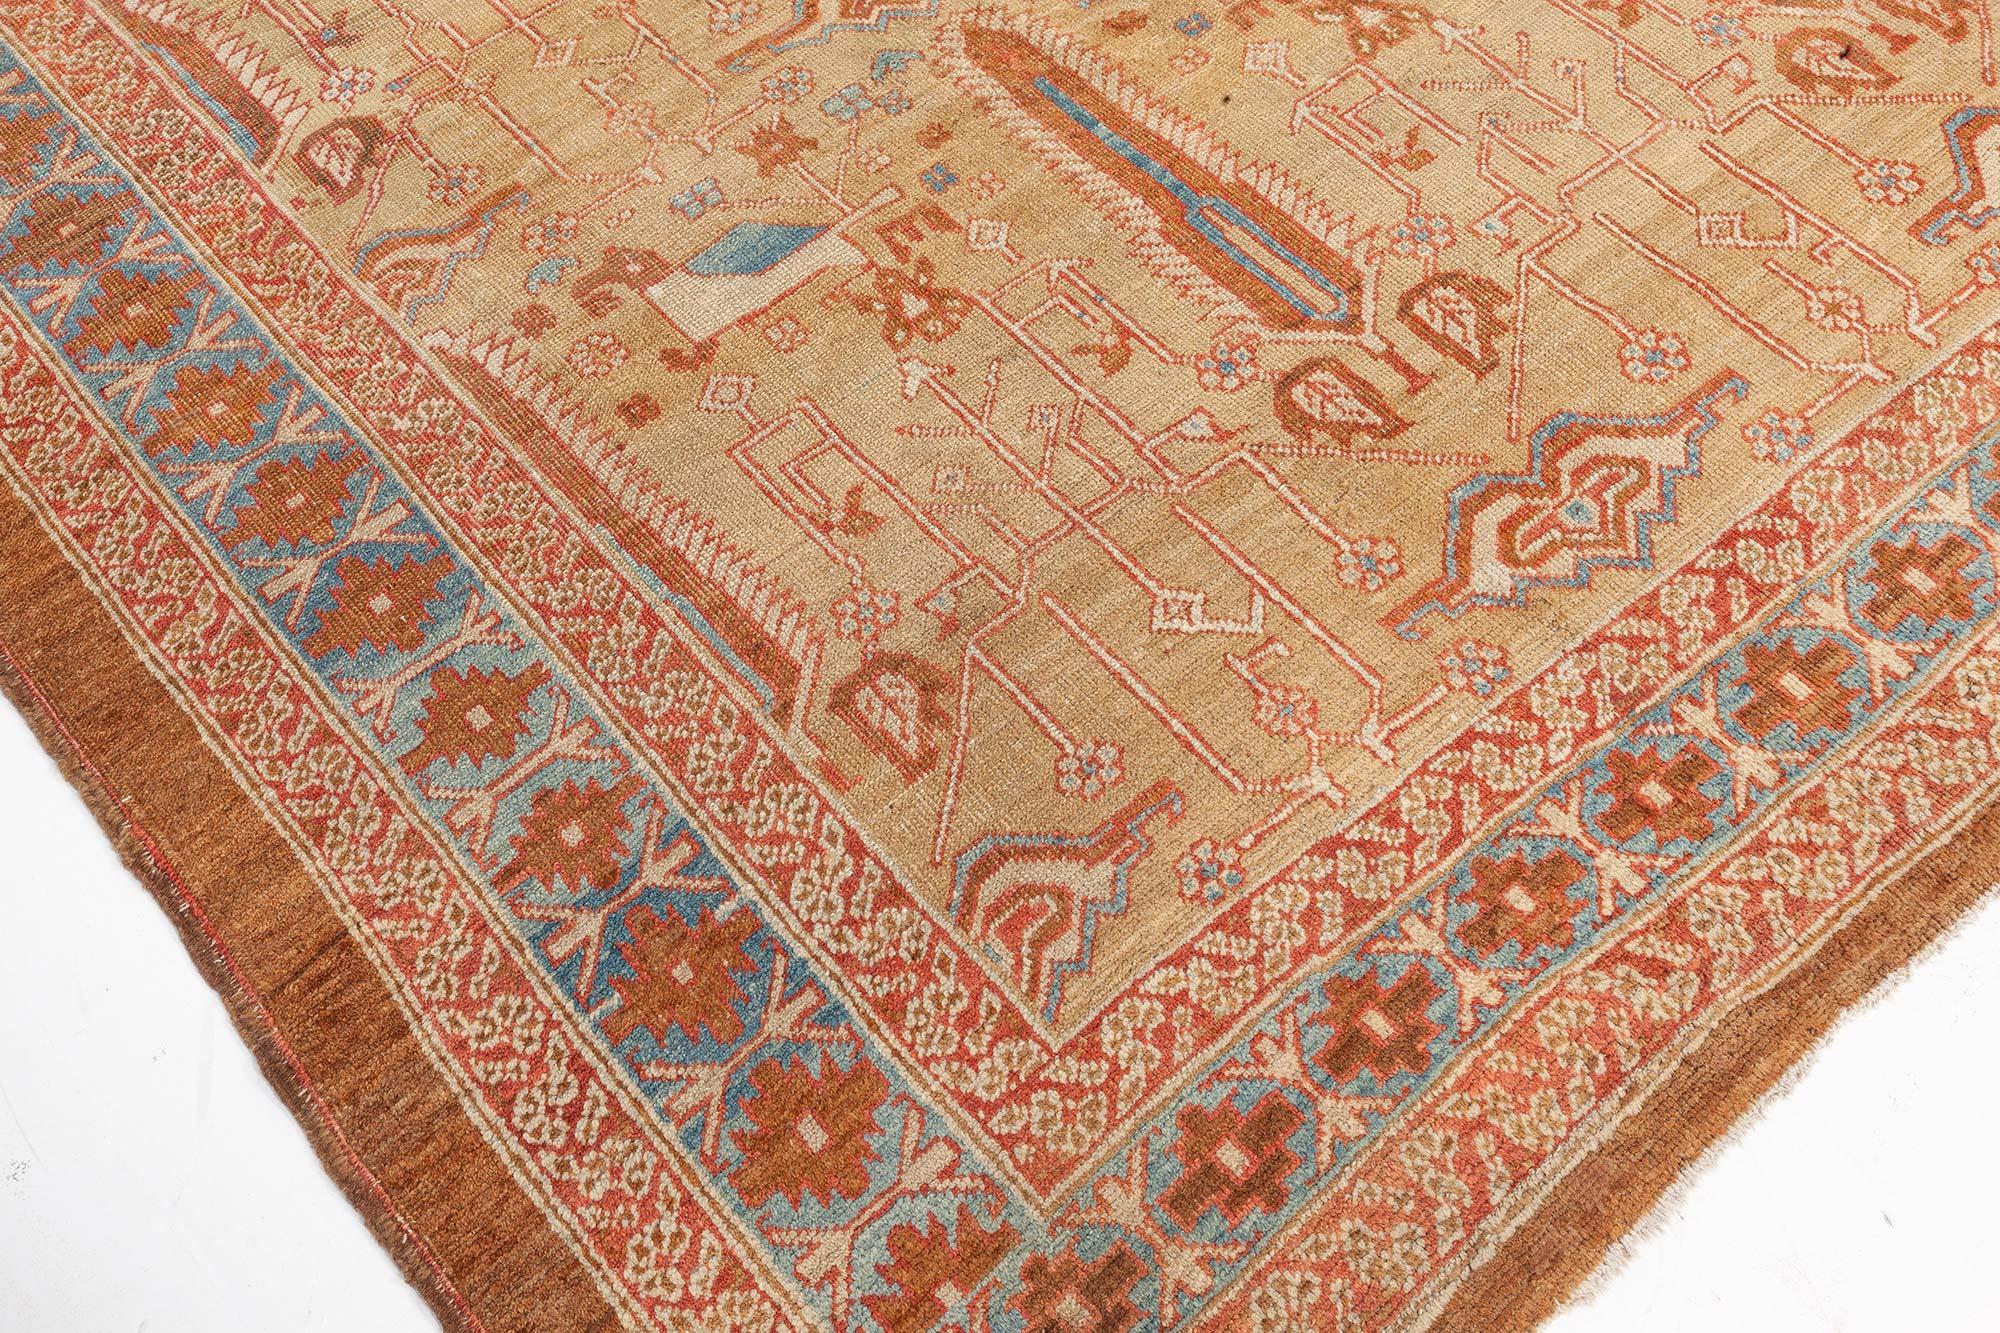 Early 19th Century Primitive Bakshaish Carpet In Good Condition For Sale In New York, NY